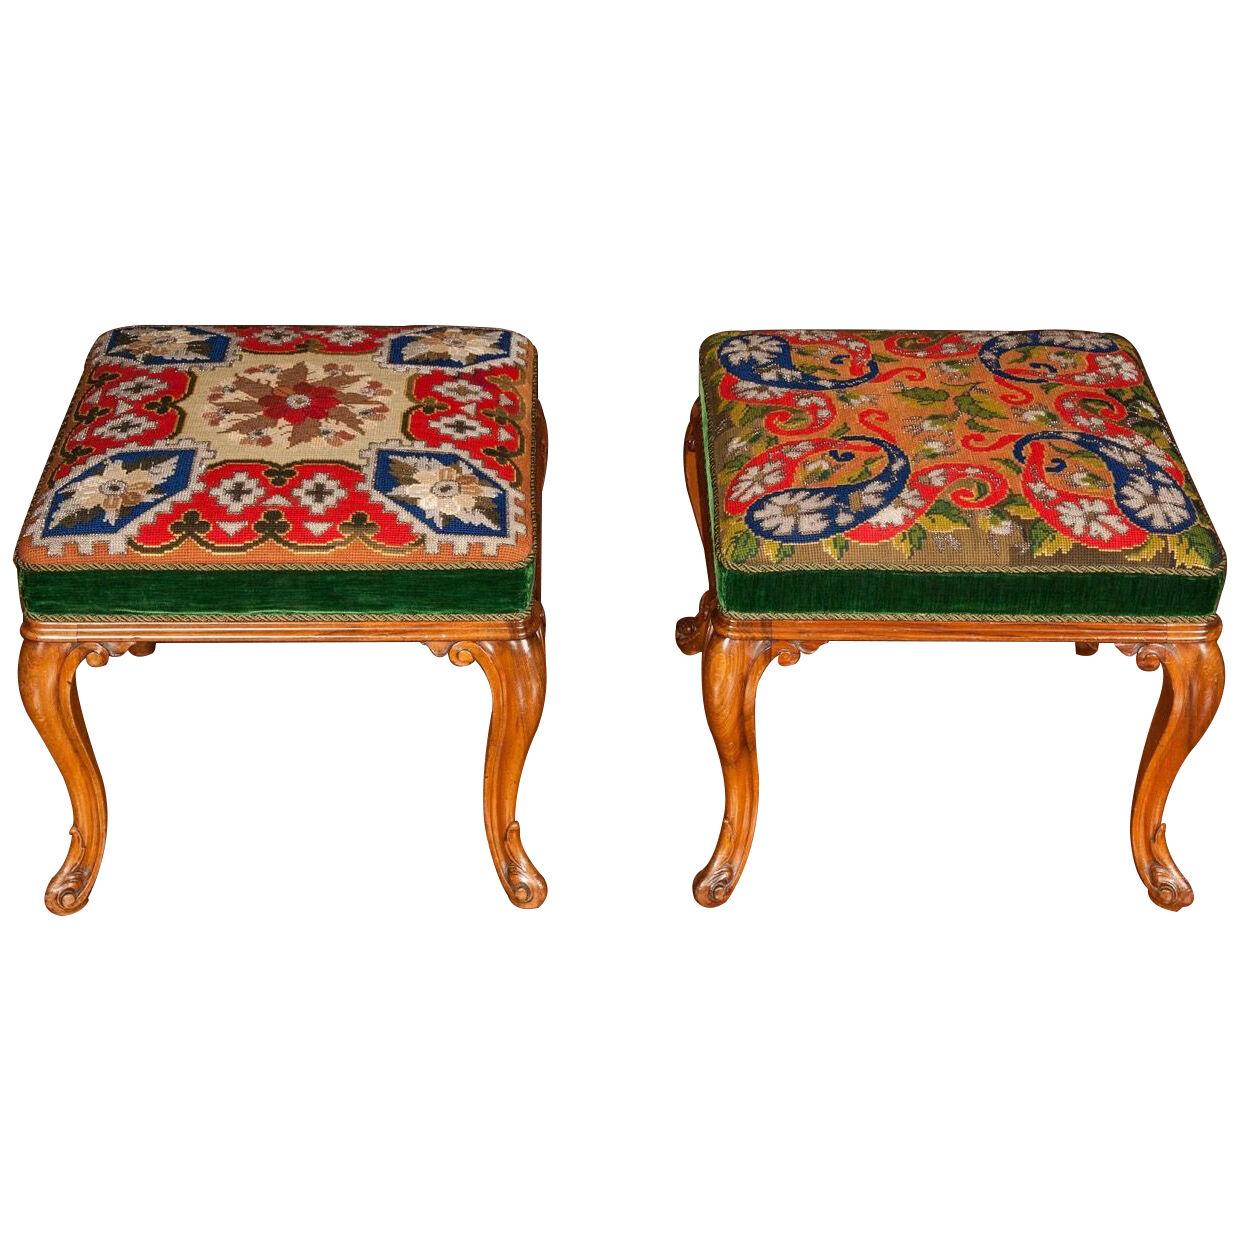 Pair of 19th Century Walnut Stools with Berlin Needlework covers.